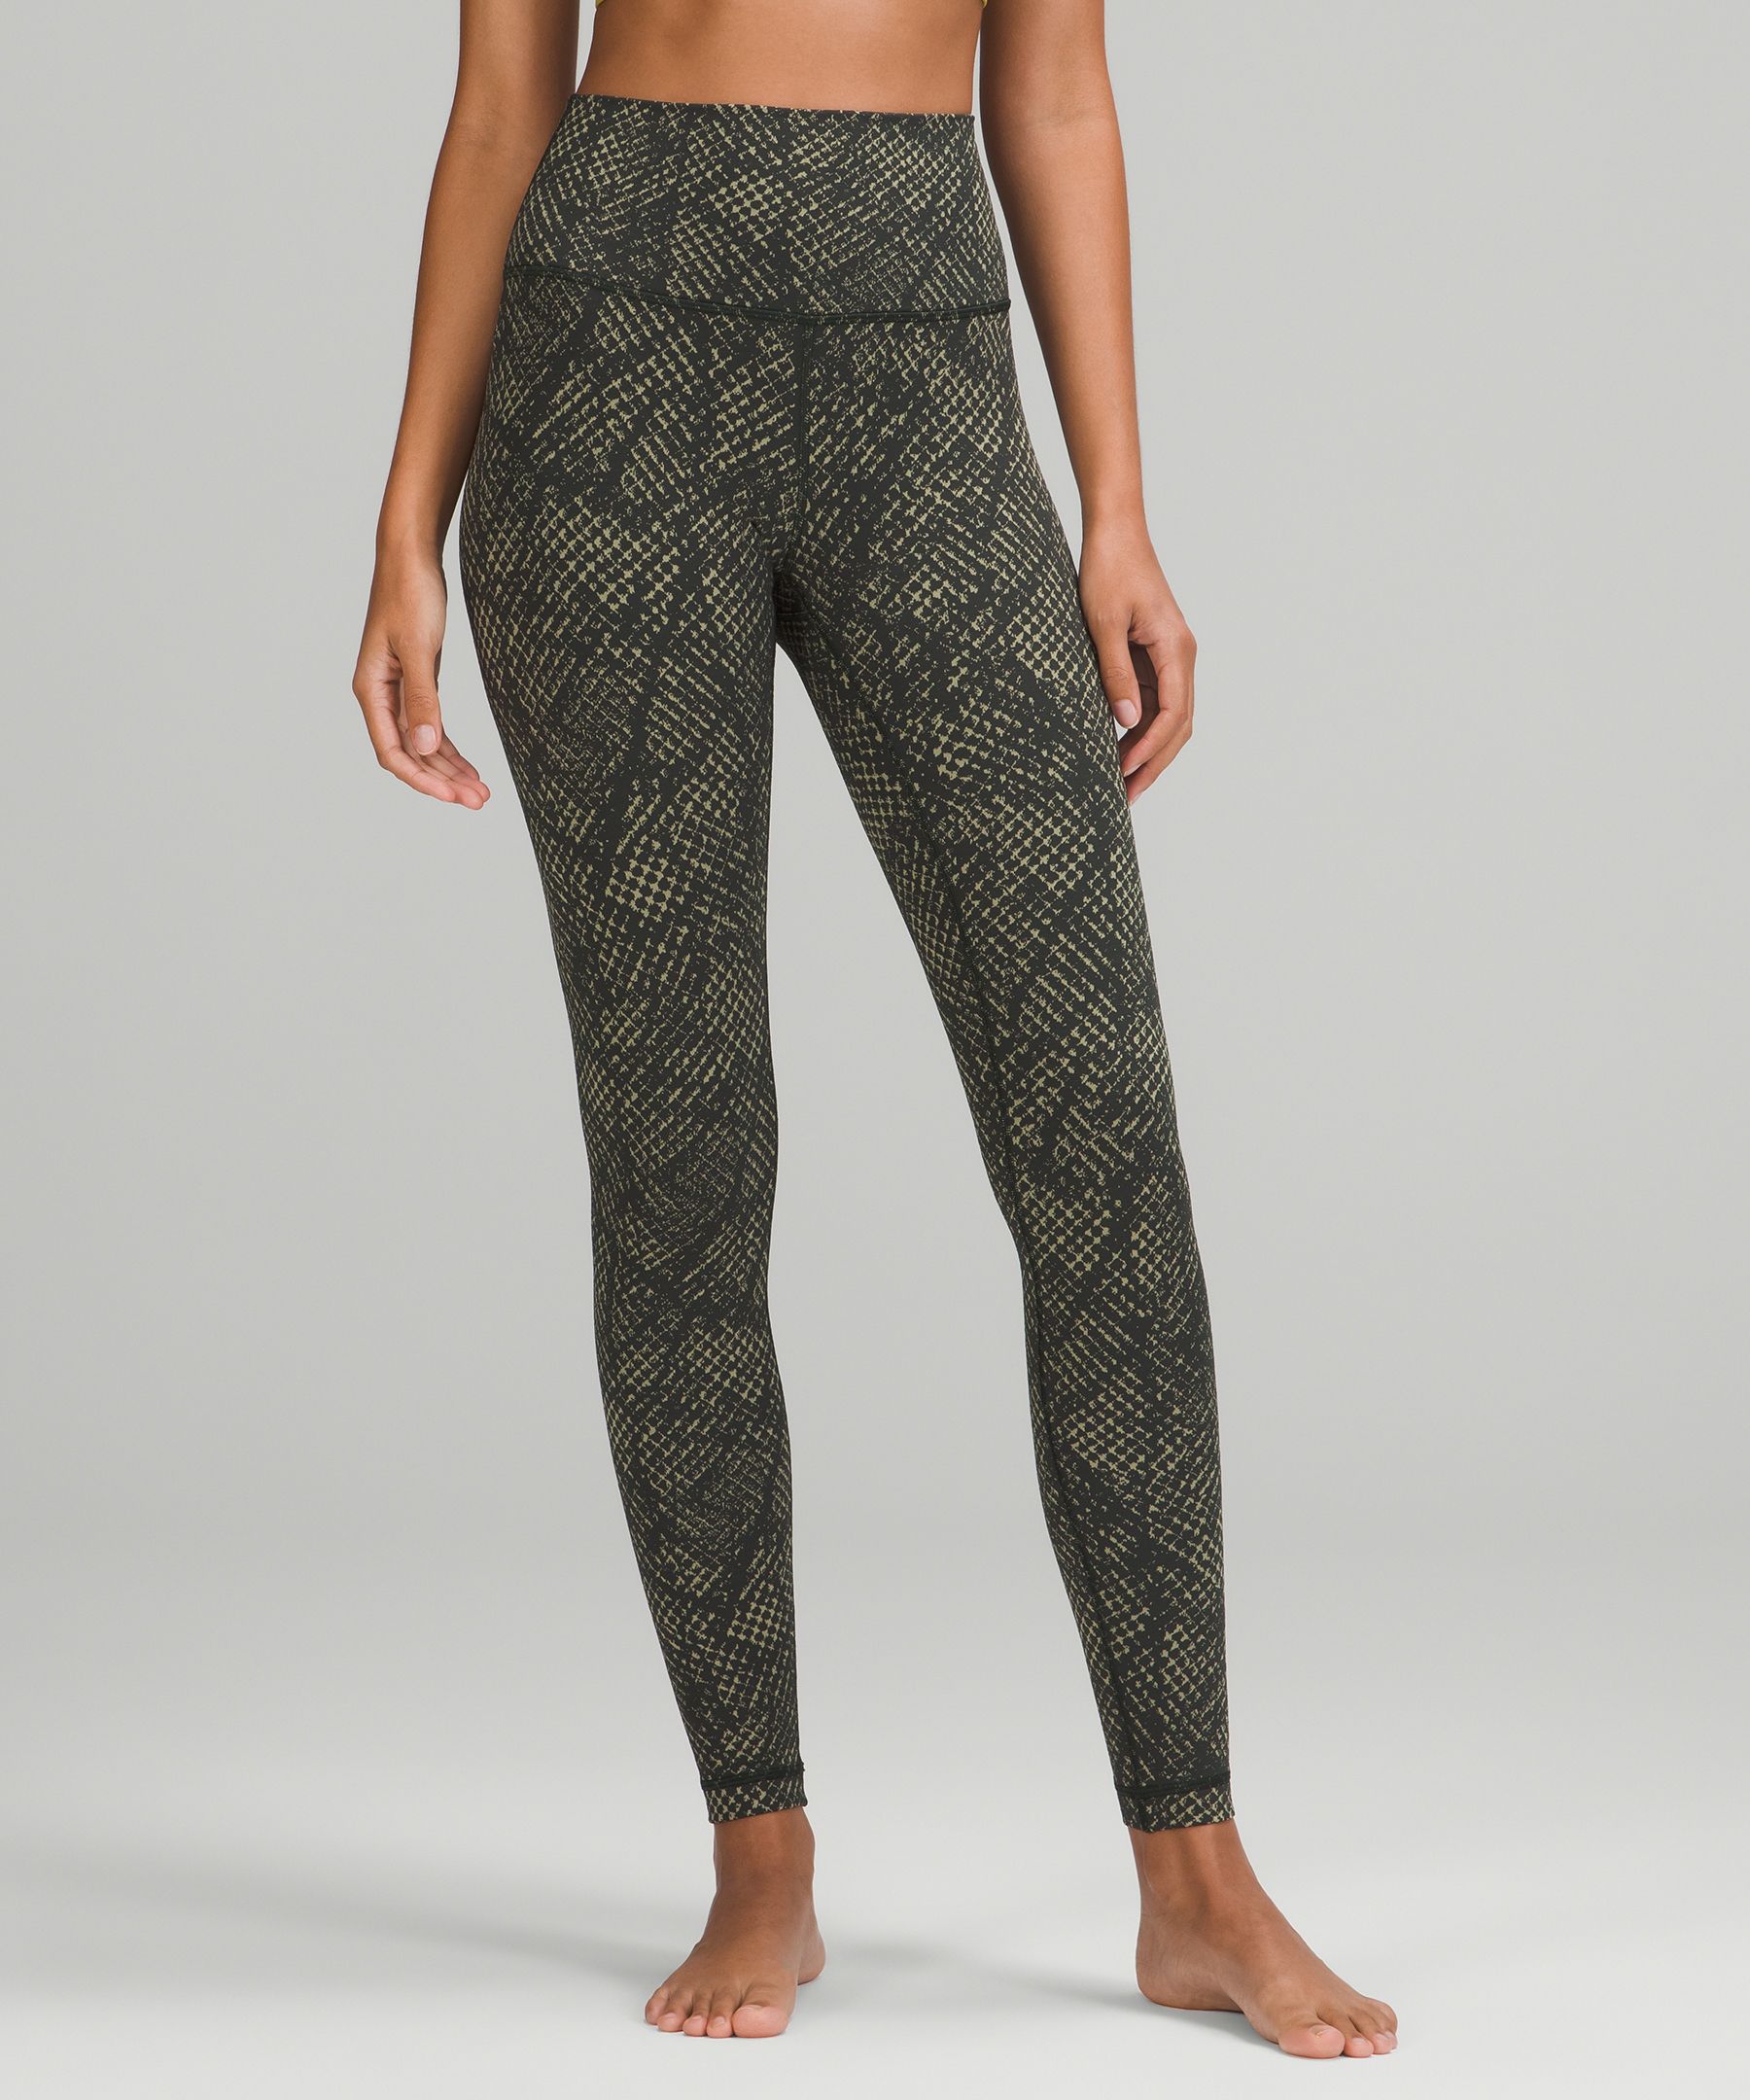 Lululemon Wunder Under High-rise Tights 28" Luxtreme In Reptilia Jacquard Rainforest Green Rosemary Green